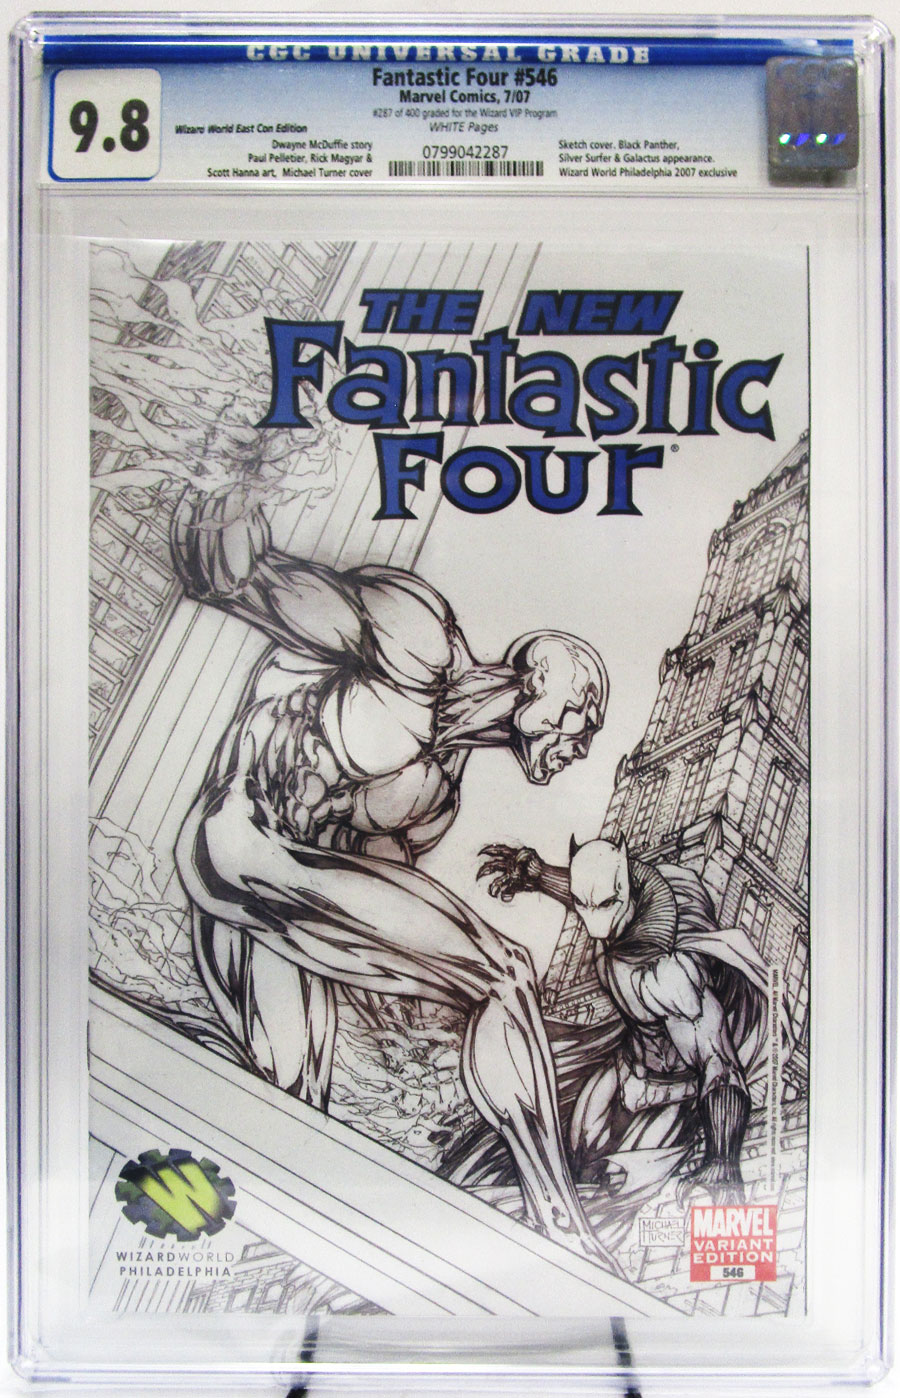 Fantastic Four Vol 3 #546 Cover D Michael Turner WWP Sketch Cover CGC 9.8